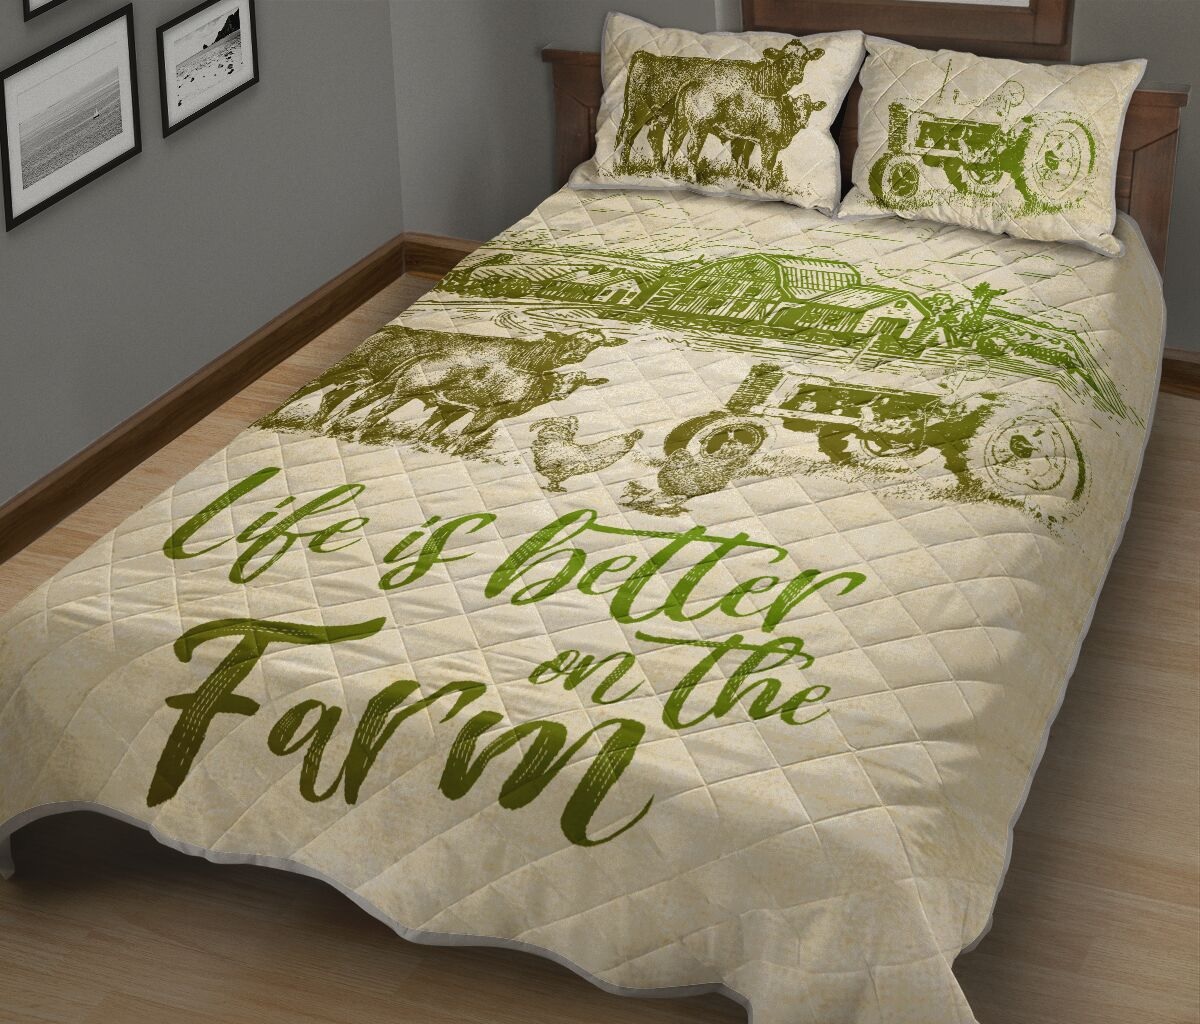 Cows life is better on the farm quilt – maria